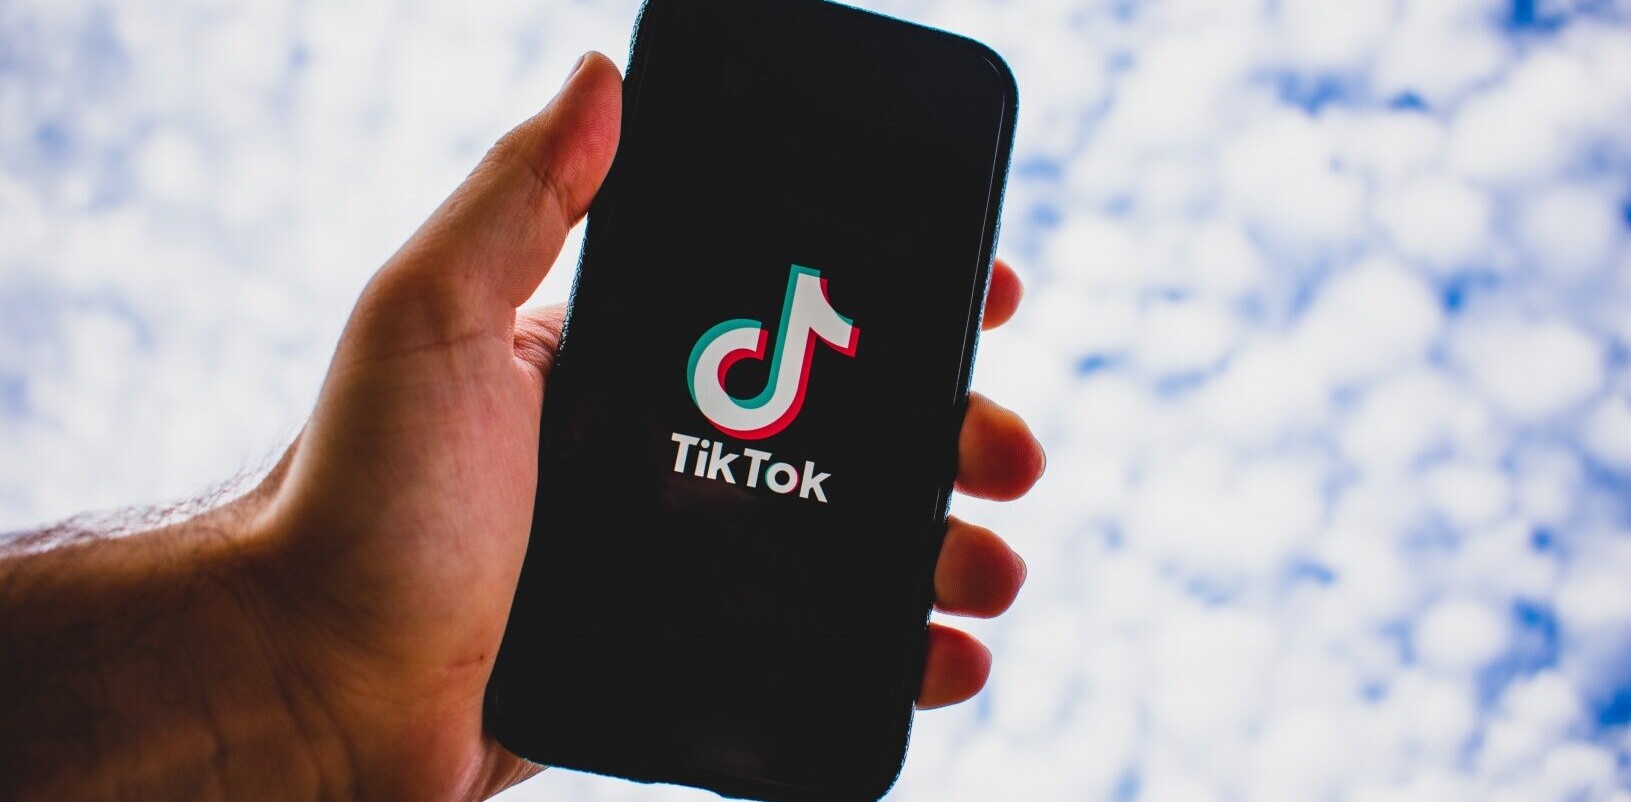 TikTok says it removed 16 million videos from India in second half of 2019